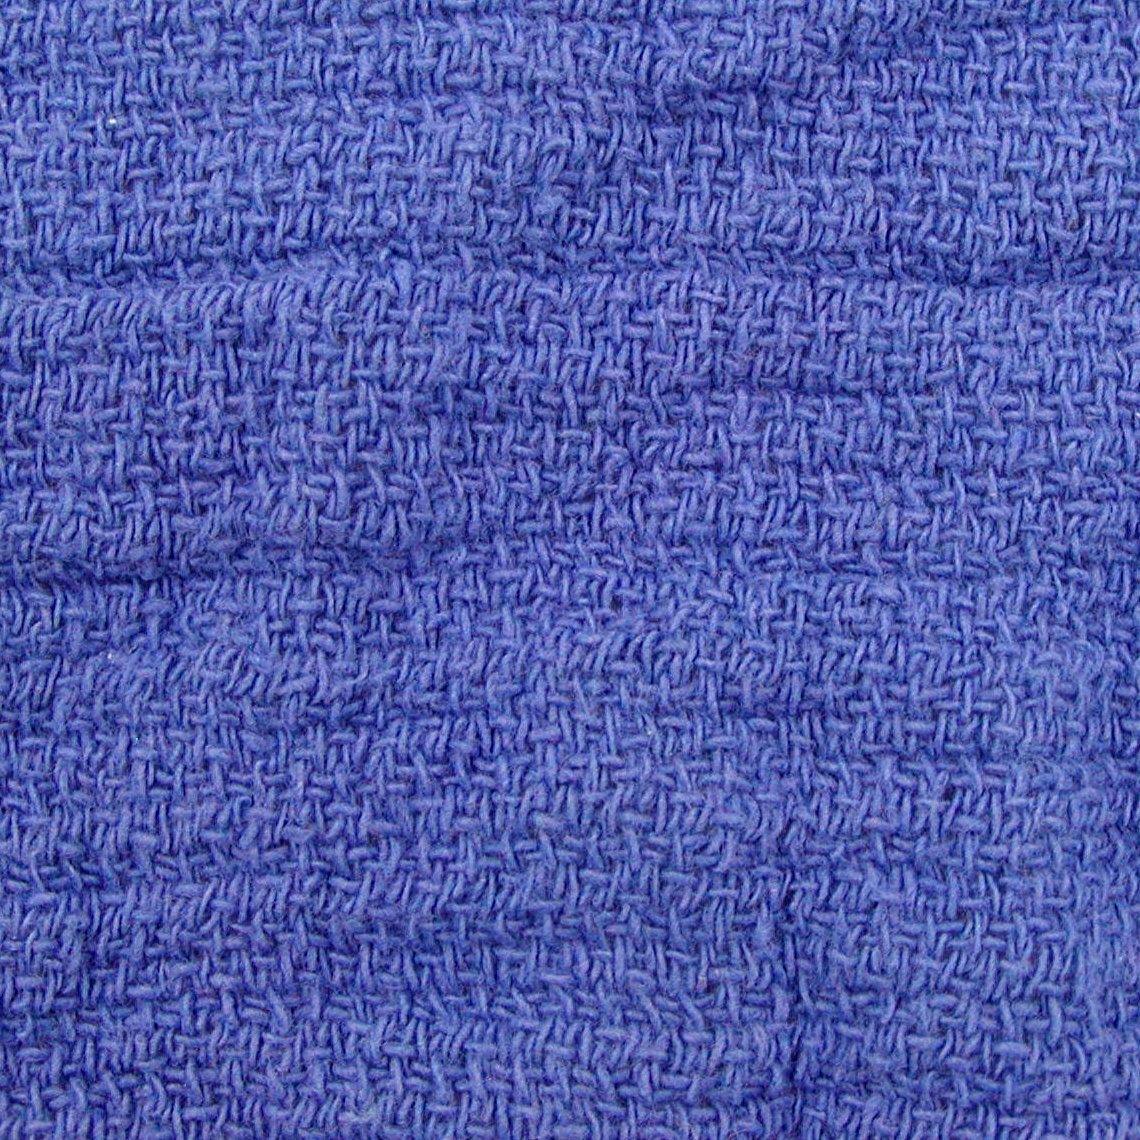 New Blue Surgical Huck Towels